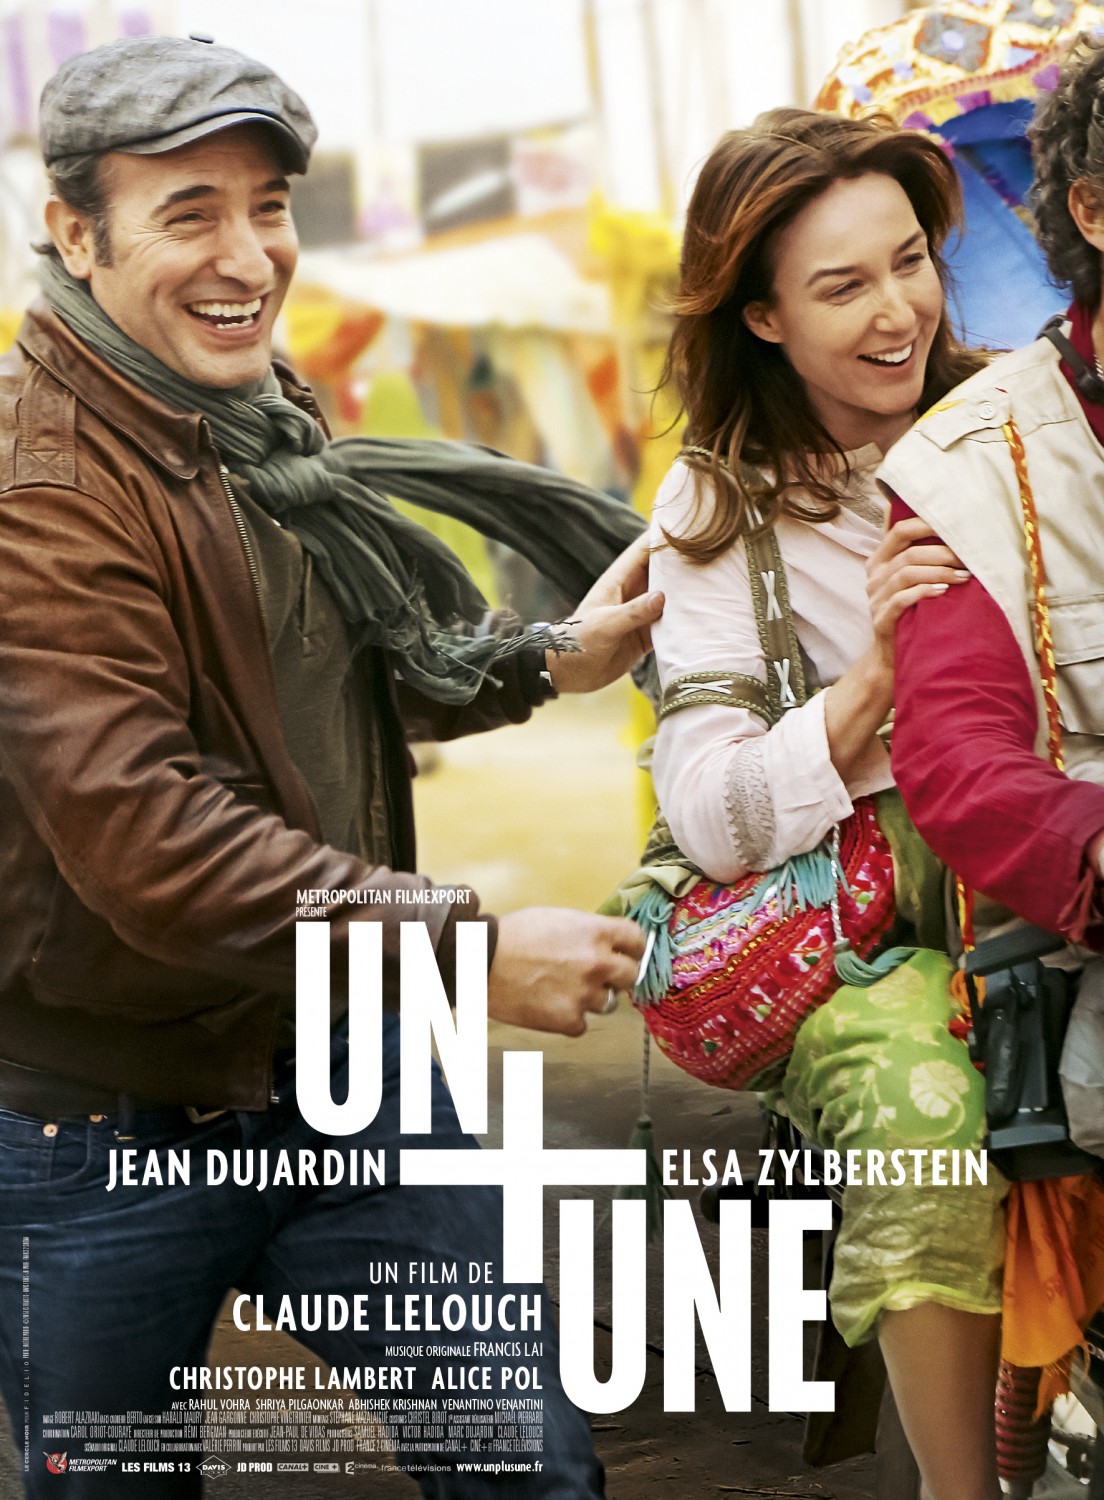 Extra Large Movie Poster Image for Un plus une 